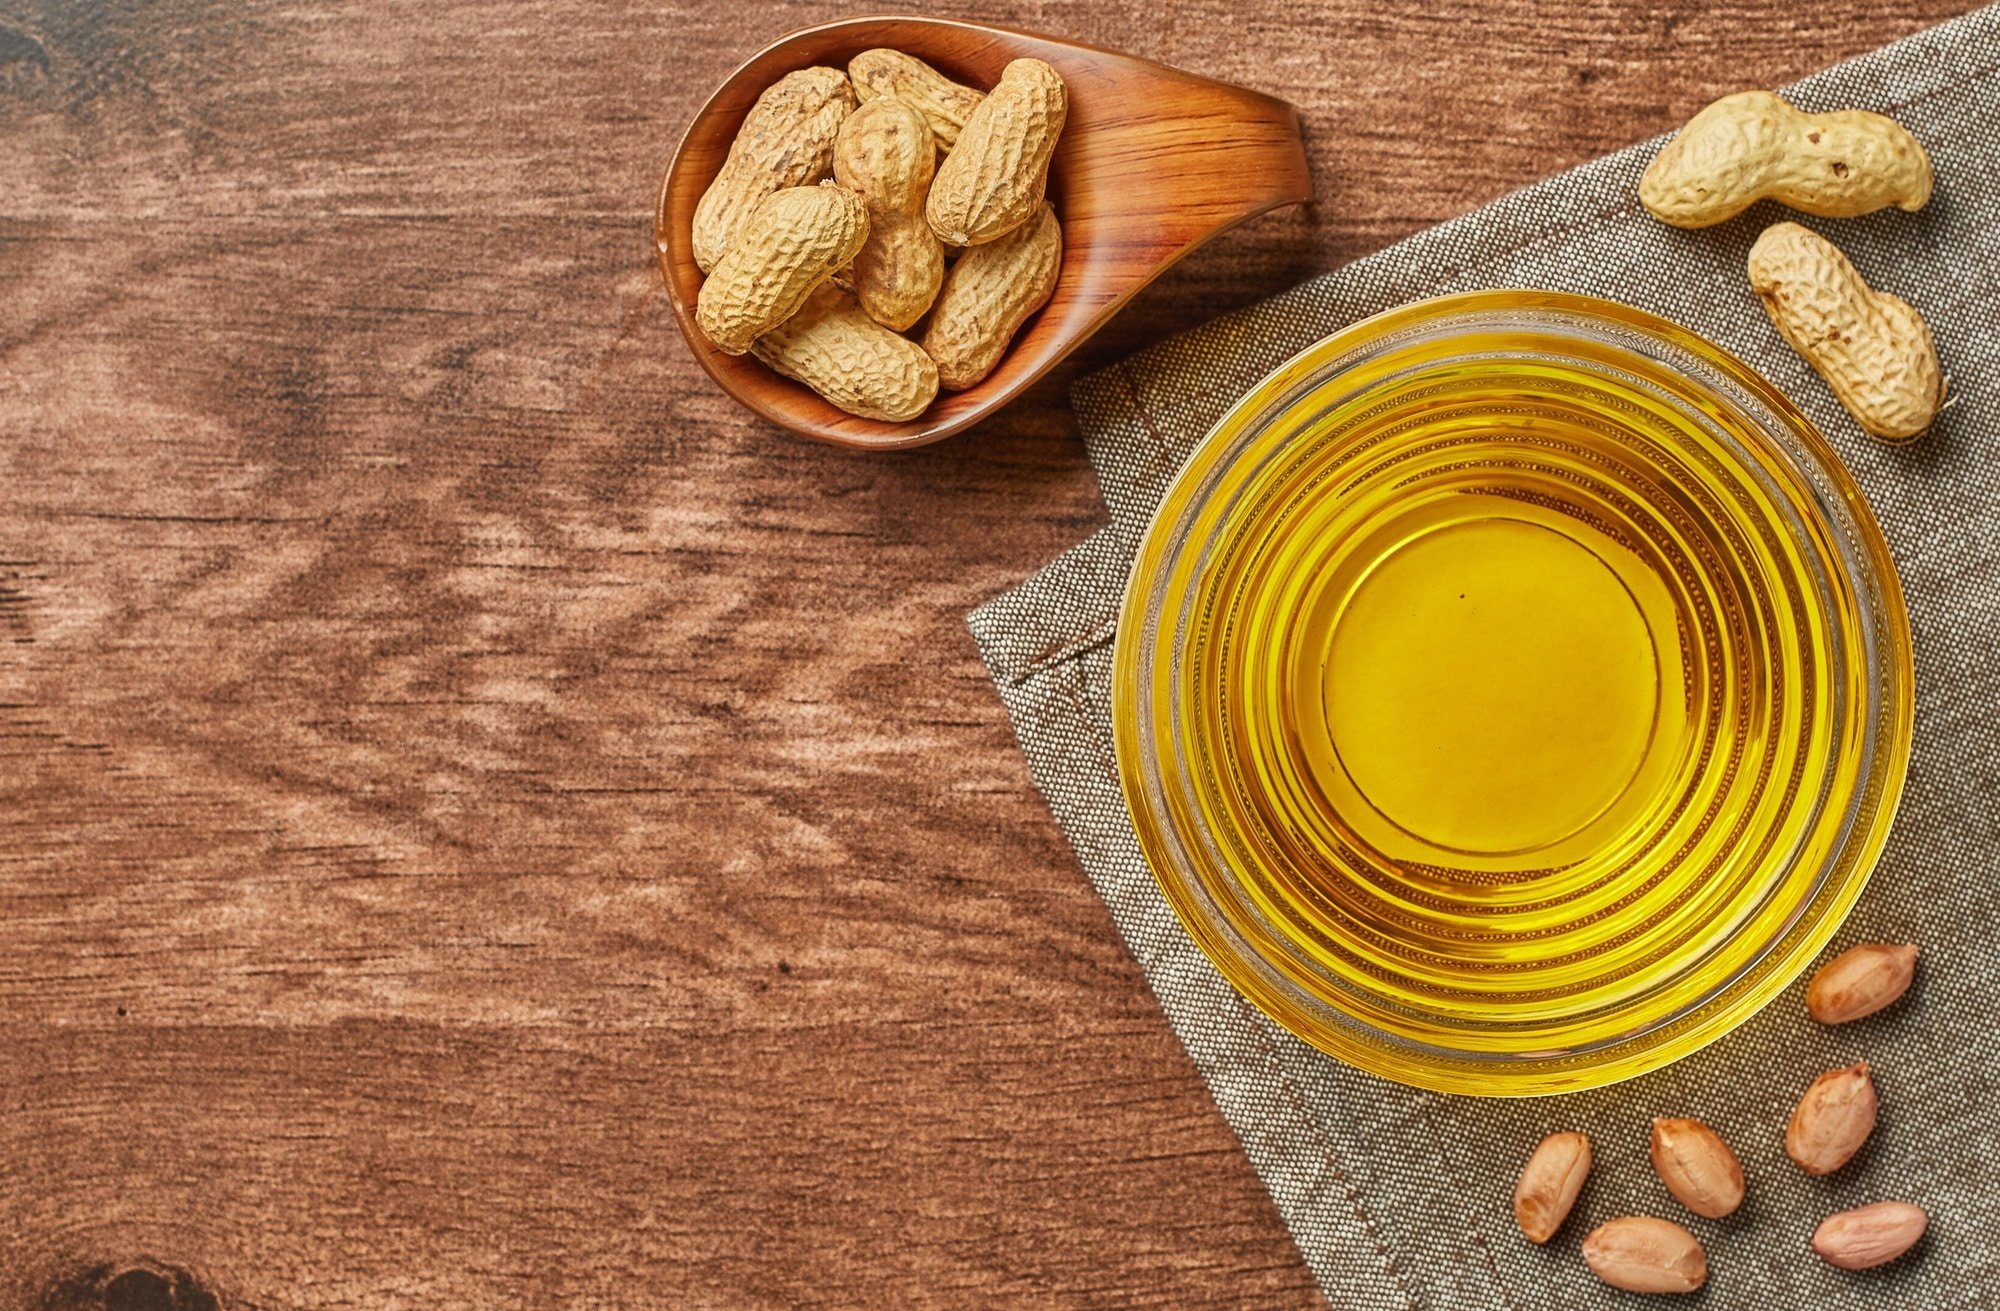 Peanut Oil: A Nutty Delight for Healthy Cooking